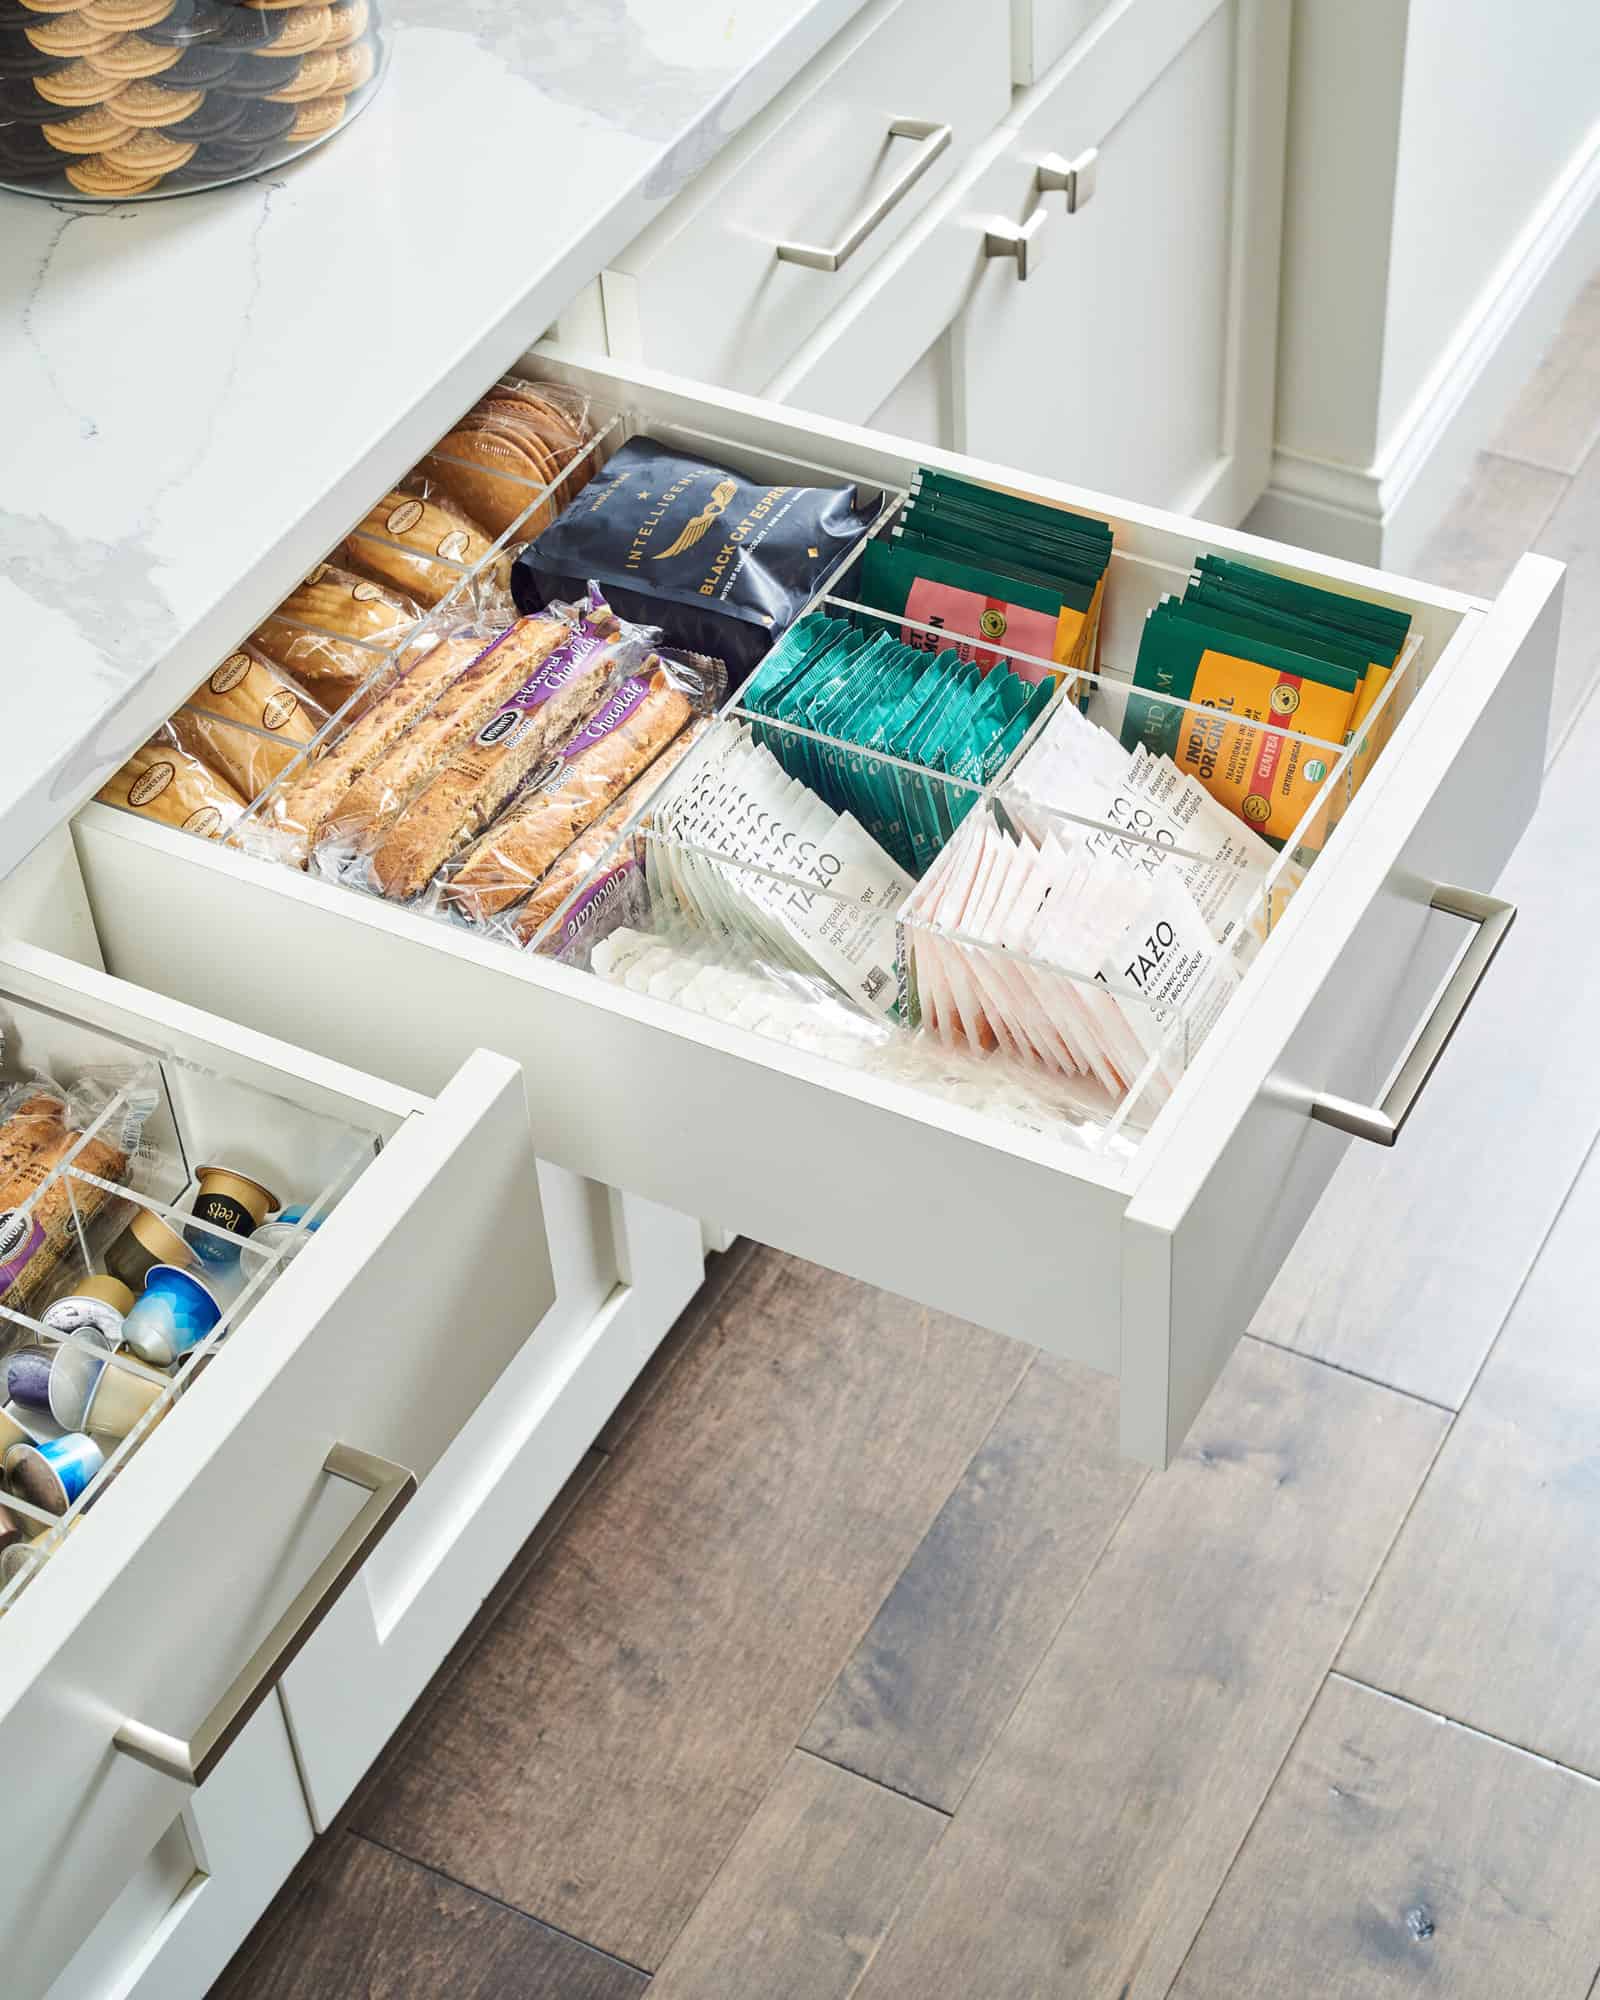 Amazing Transformation: From old drawer to kitchen space saving